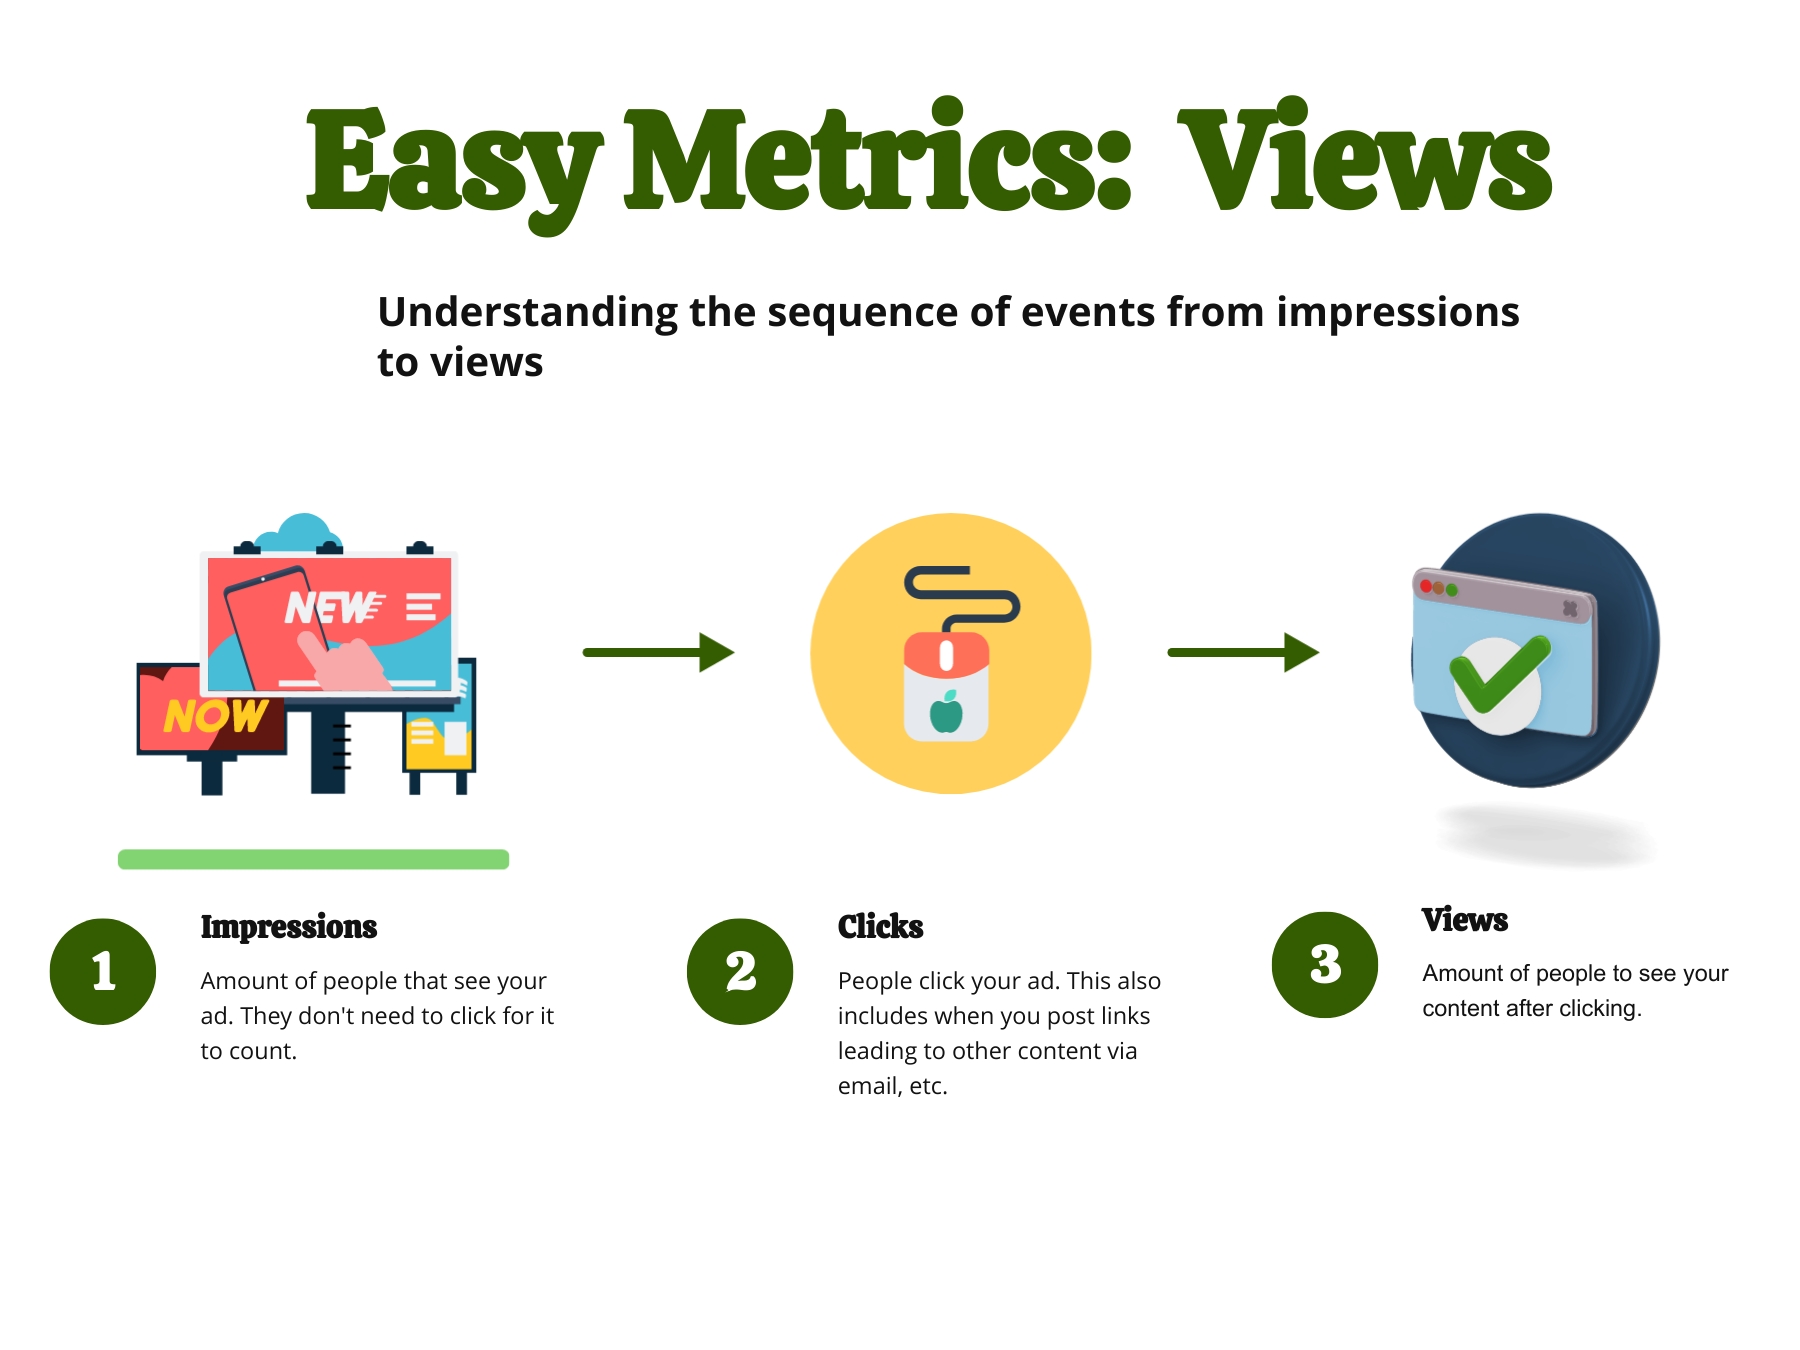 Infographic how to get more views by first understanding key metrics like impressions, clicks, and views.